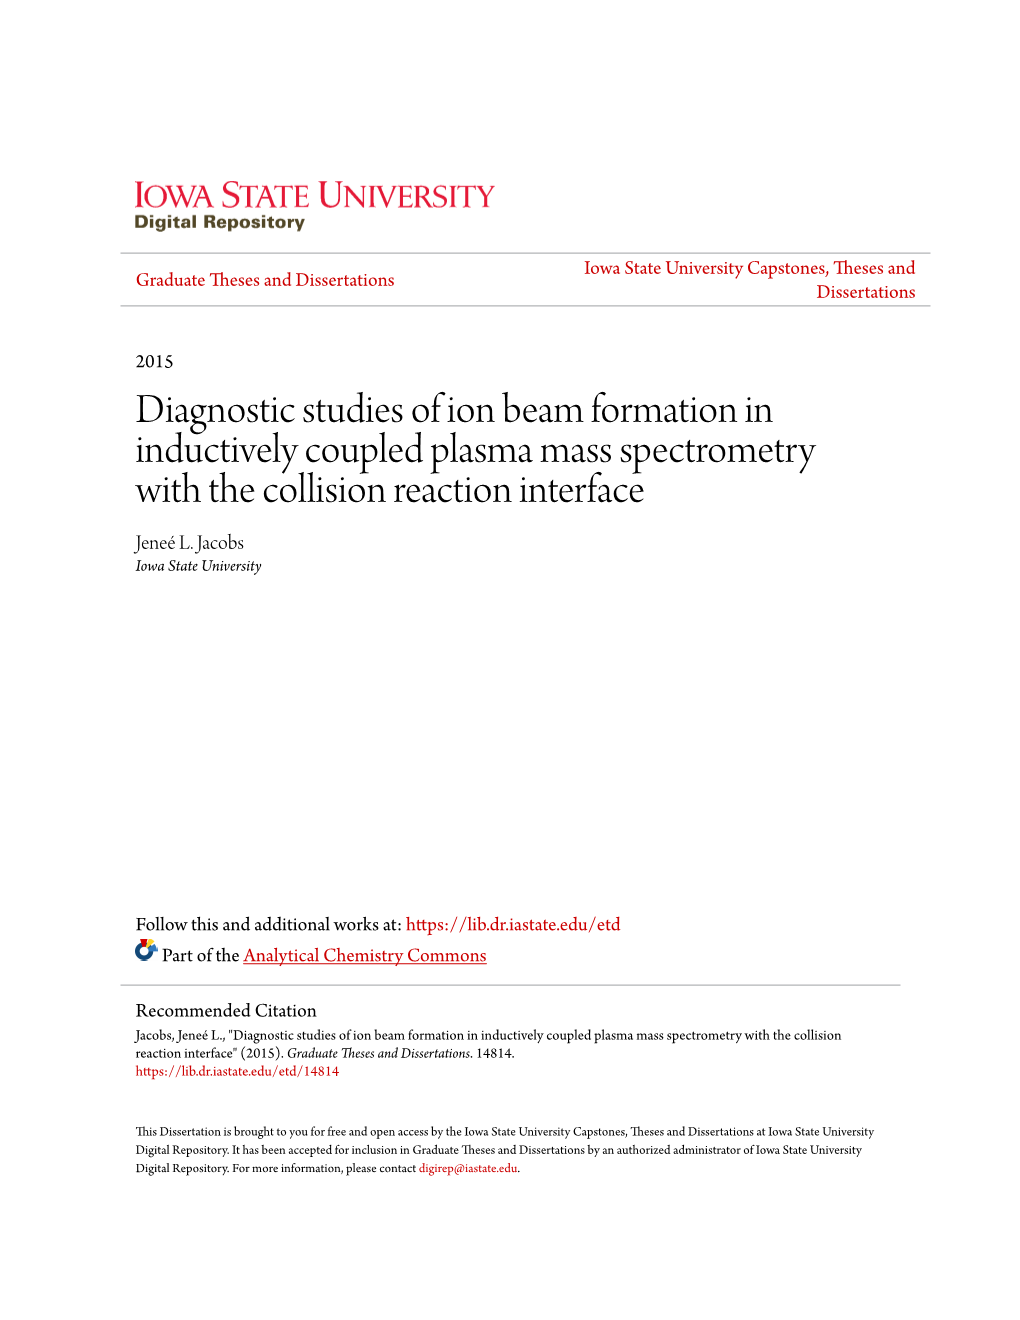 Diagnostic Studies of Ion Beam Formation in Inductively Coupled Plasma Mass Spectrometry with the Collision Reaction Interface Jeneé L